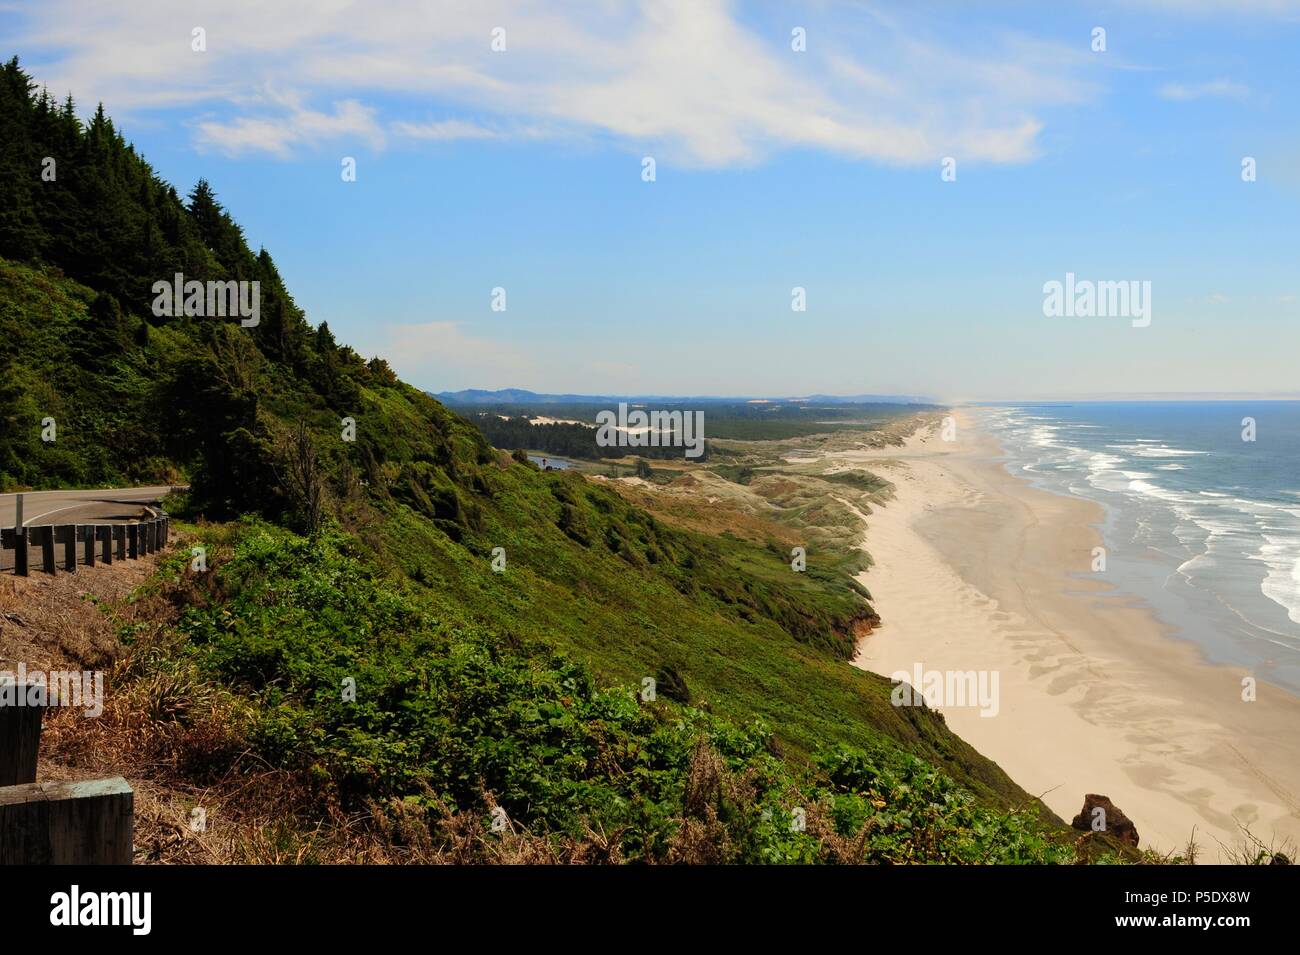 View of a long beach and coastline looking towards Florence on the Oregon Central coast, along Highway 101 Stock Photo